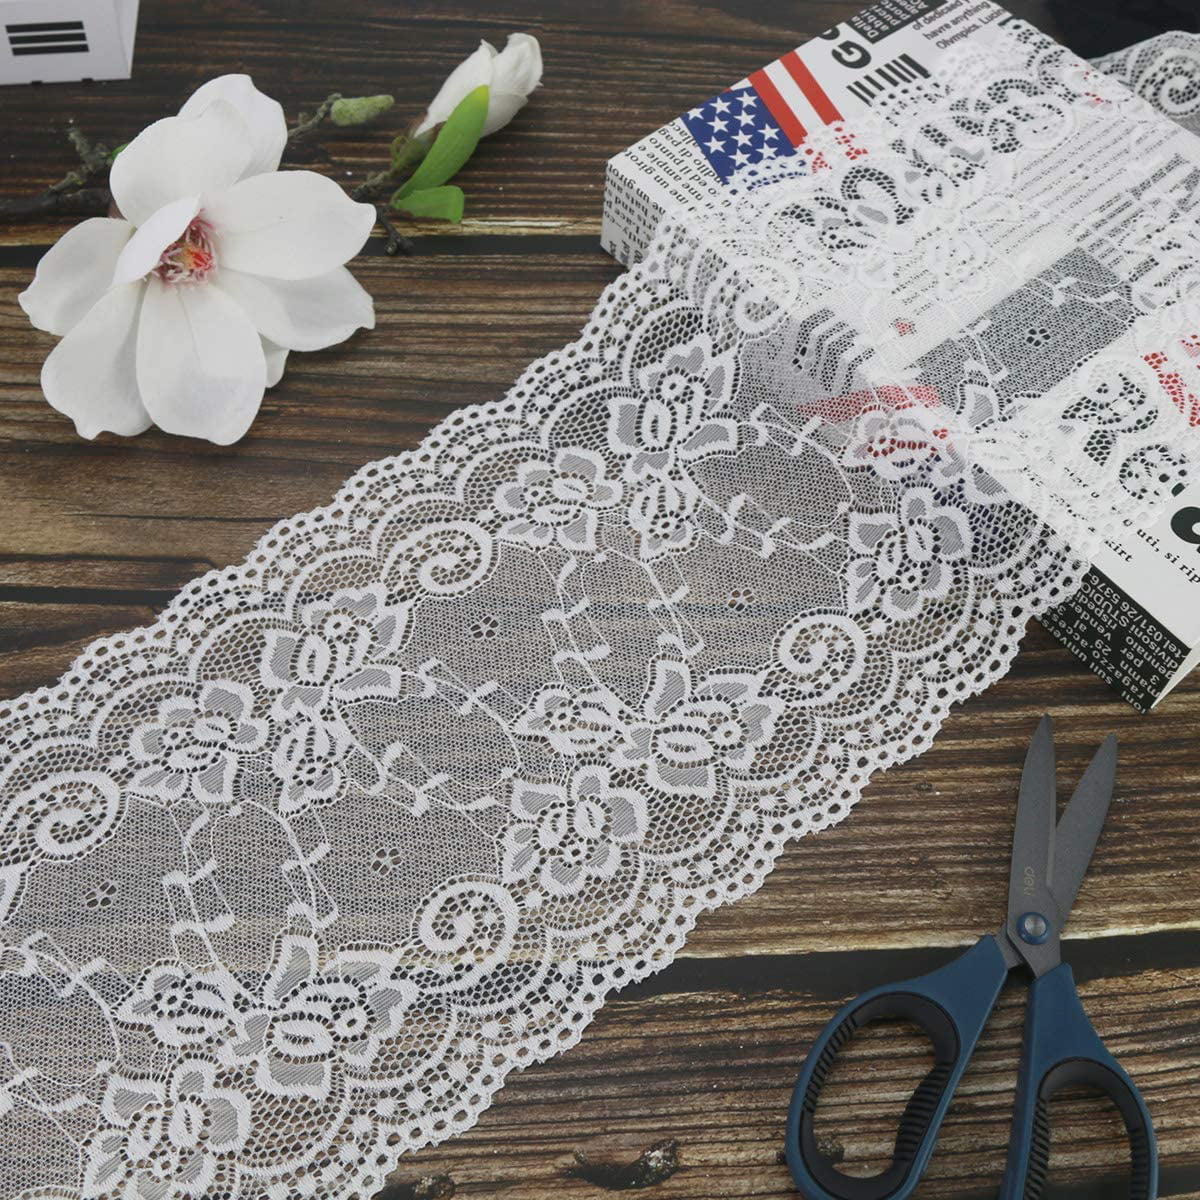 7 Wide White Lace Fabric Sewing Lace Ribbon Trim Elastic Stretchy Lace for  Crafting 5 Yard 